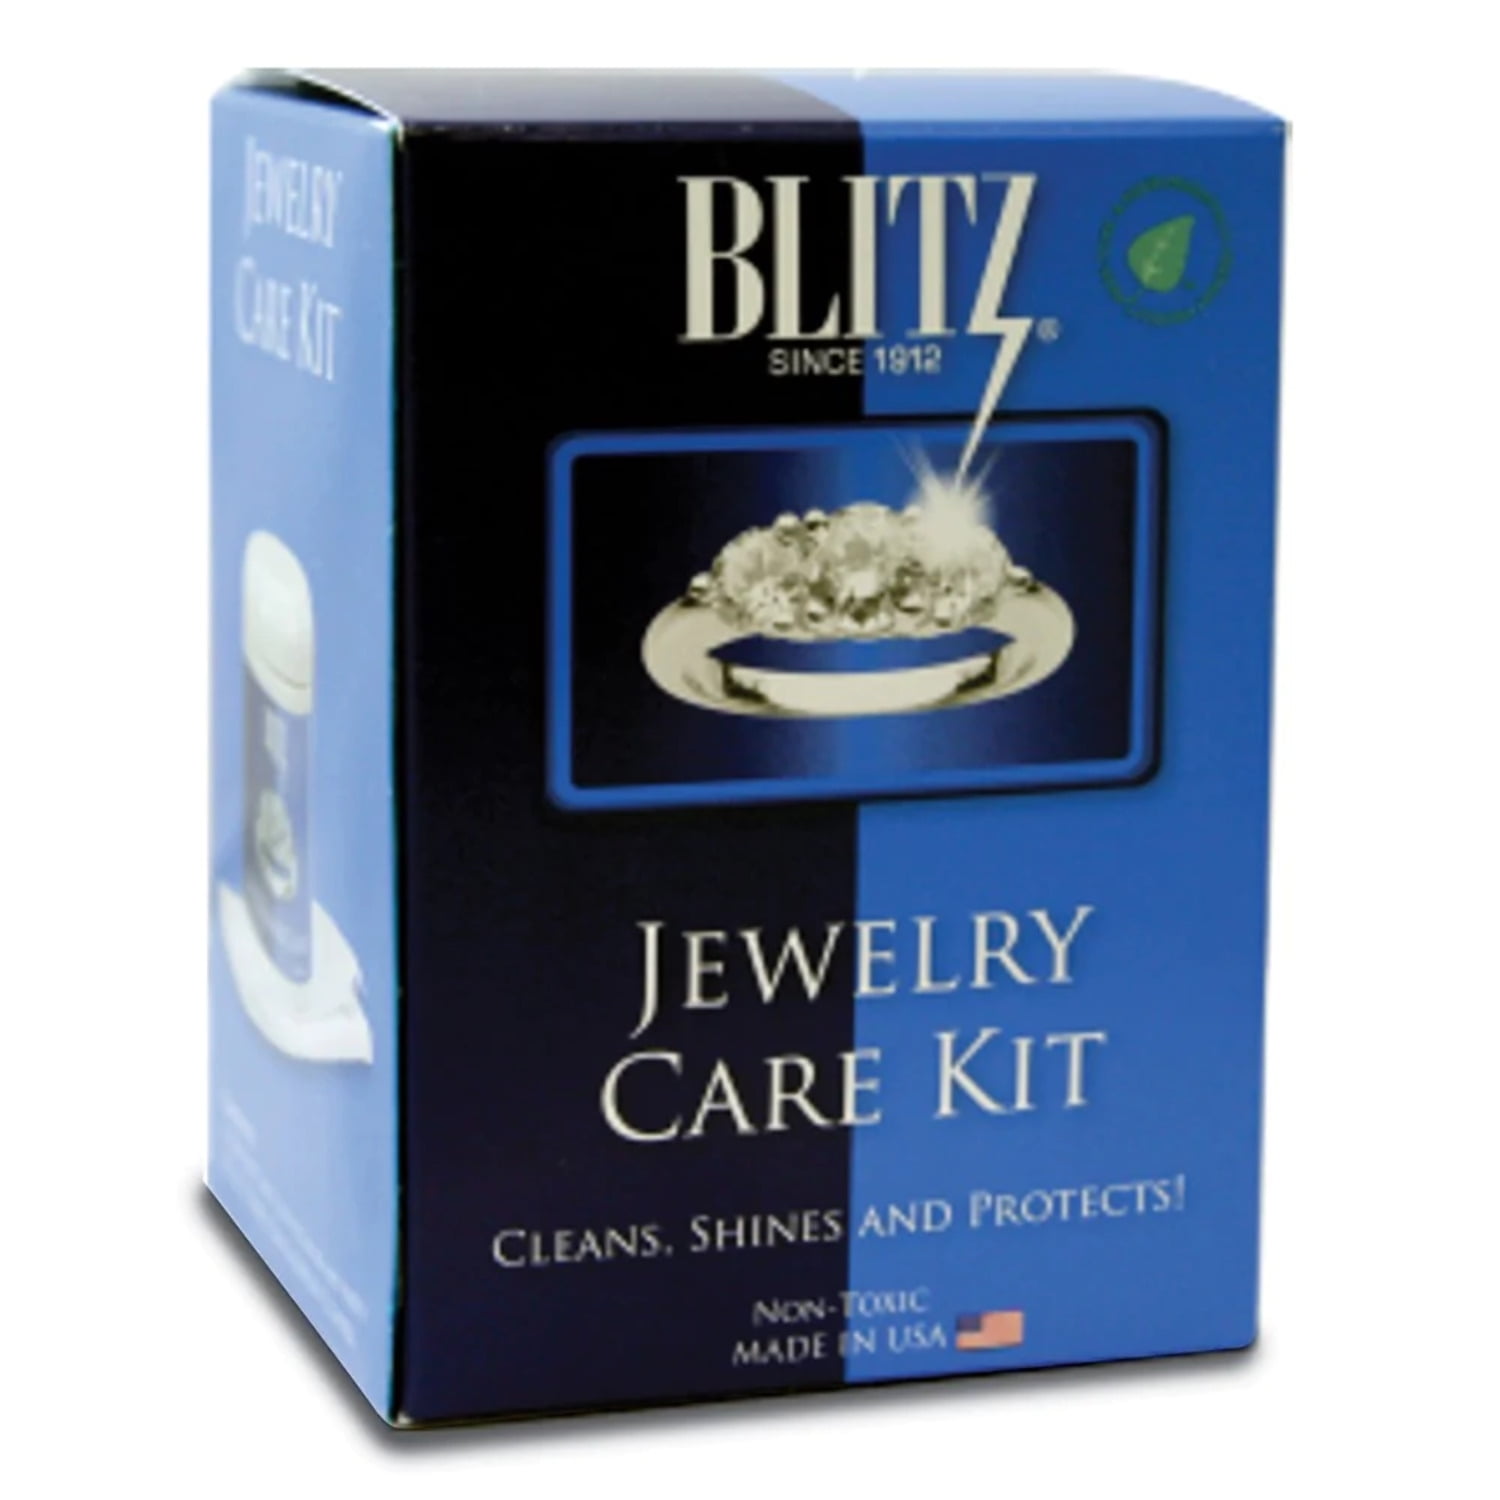 Connoisseurs Fine Jewelry Cleaner For Cleaning Gold, Platinum, Diamonds and  Precious Gemstones 